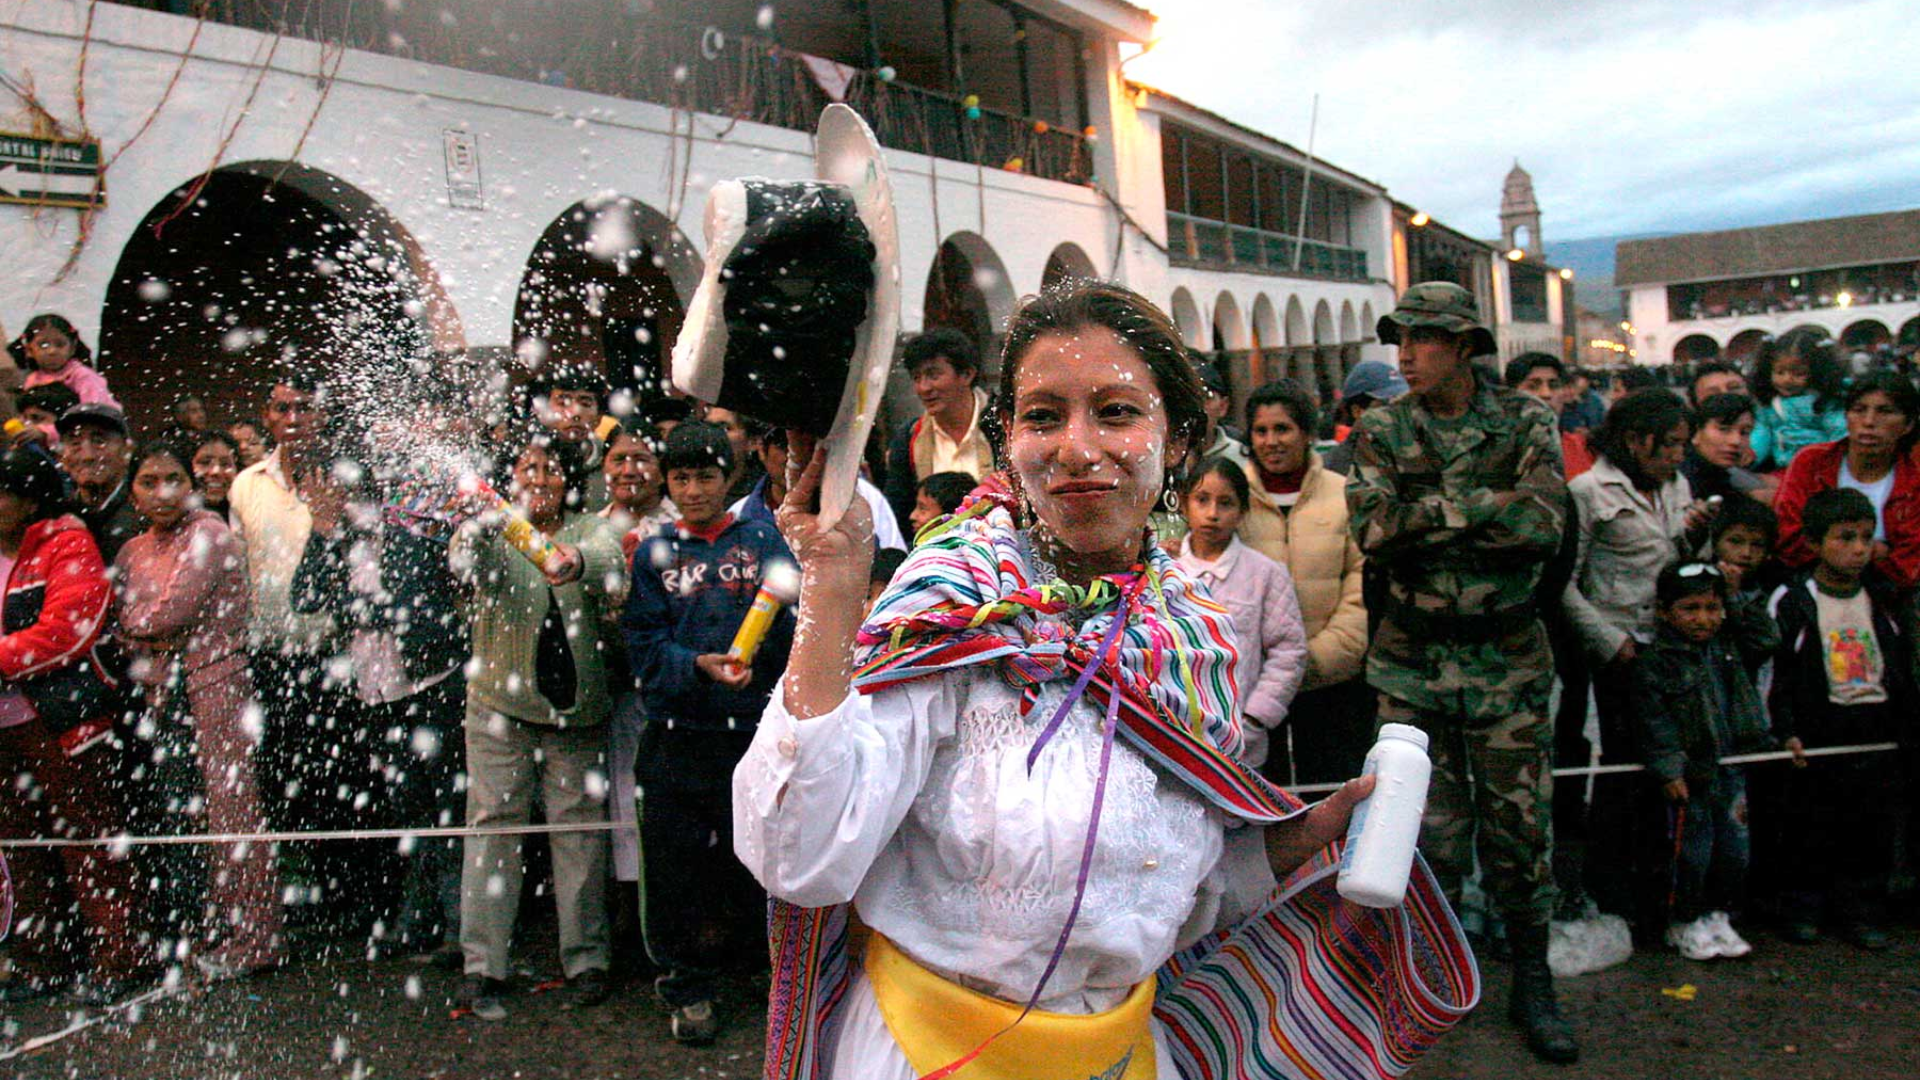 Peru is filled with joy and culture in the first months of the year with the summer carnivals.  (Andean)